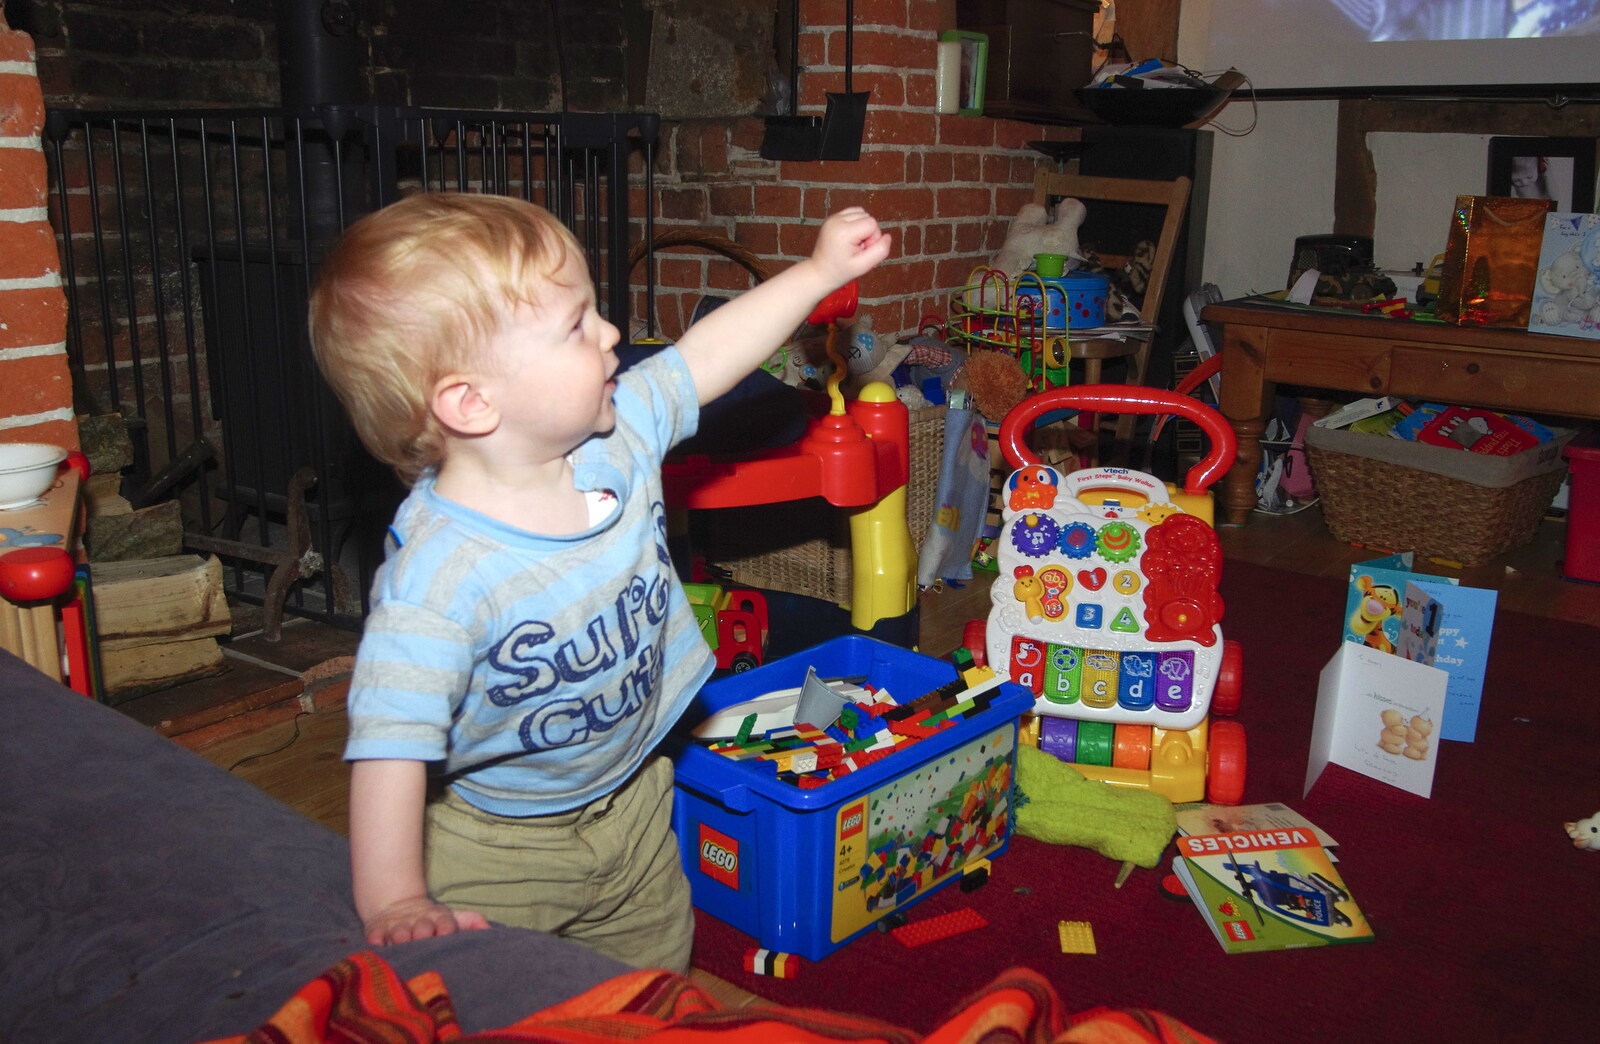 Harry is surrounded by toys from An Easter Visit from Da Gorls, Brome, Suffolk - 2nd April 2013